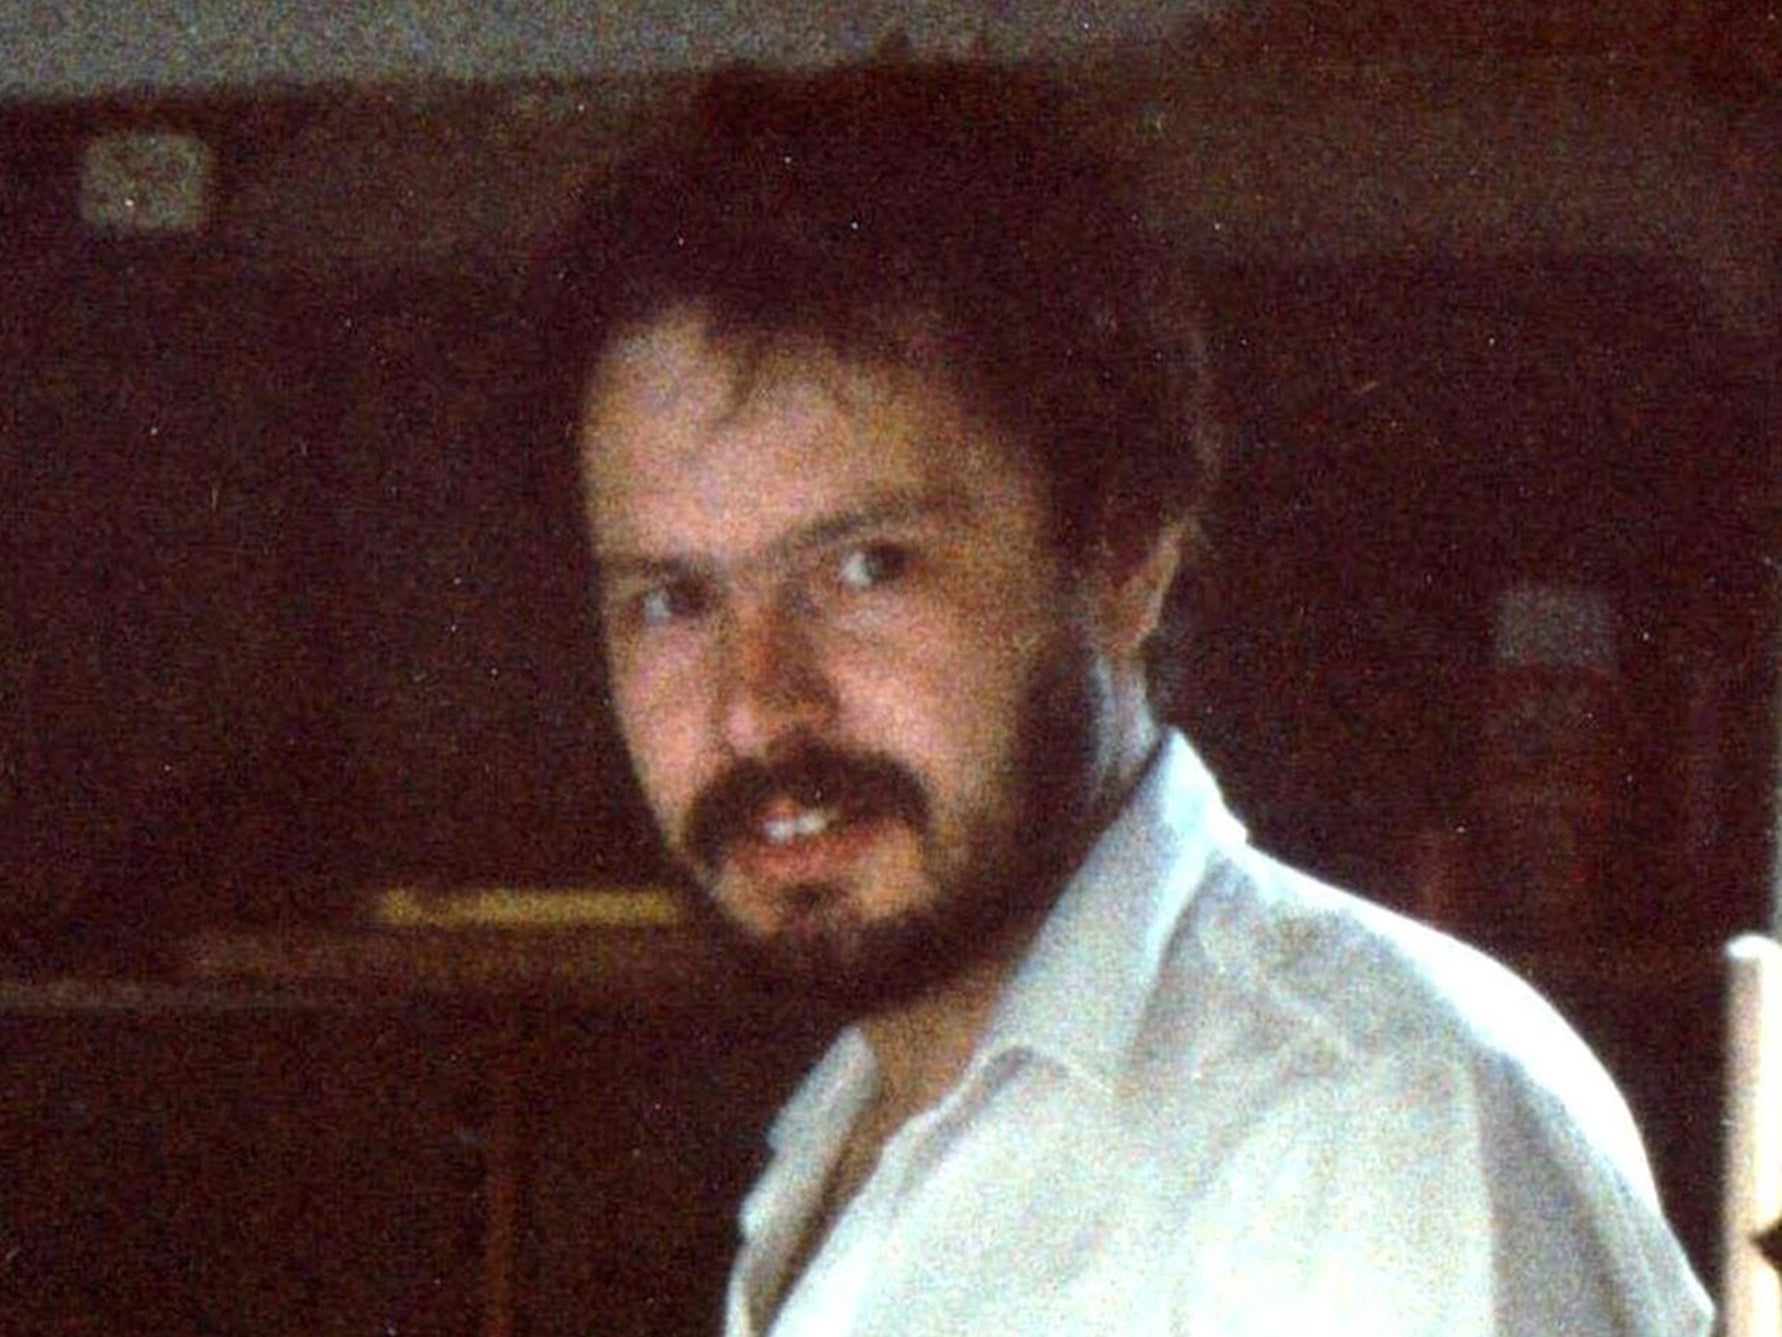 Daniel Morgan, a father of two, was brutally murdered in 1987